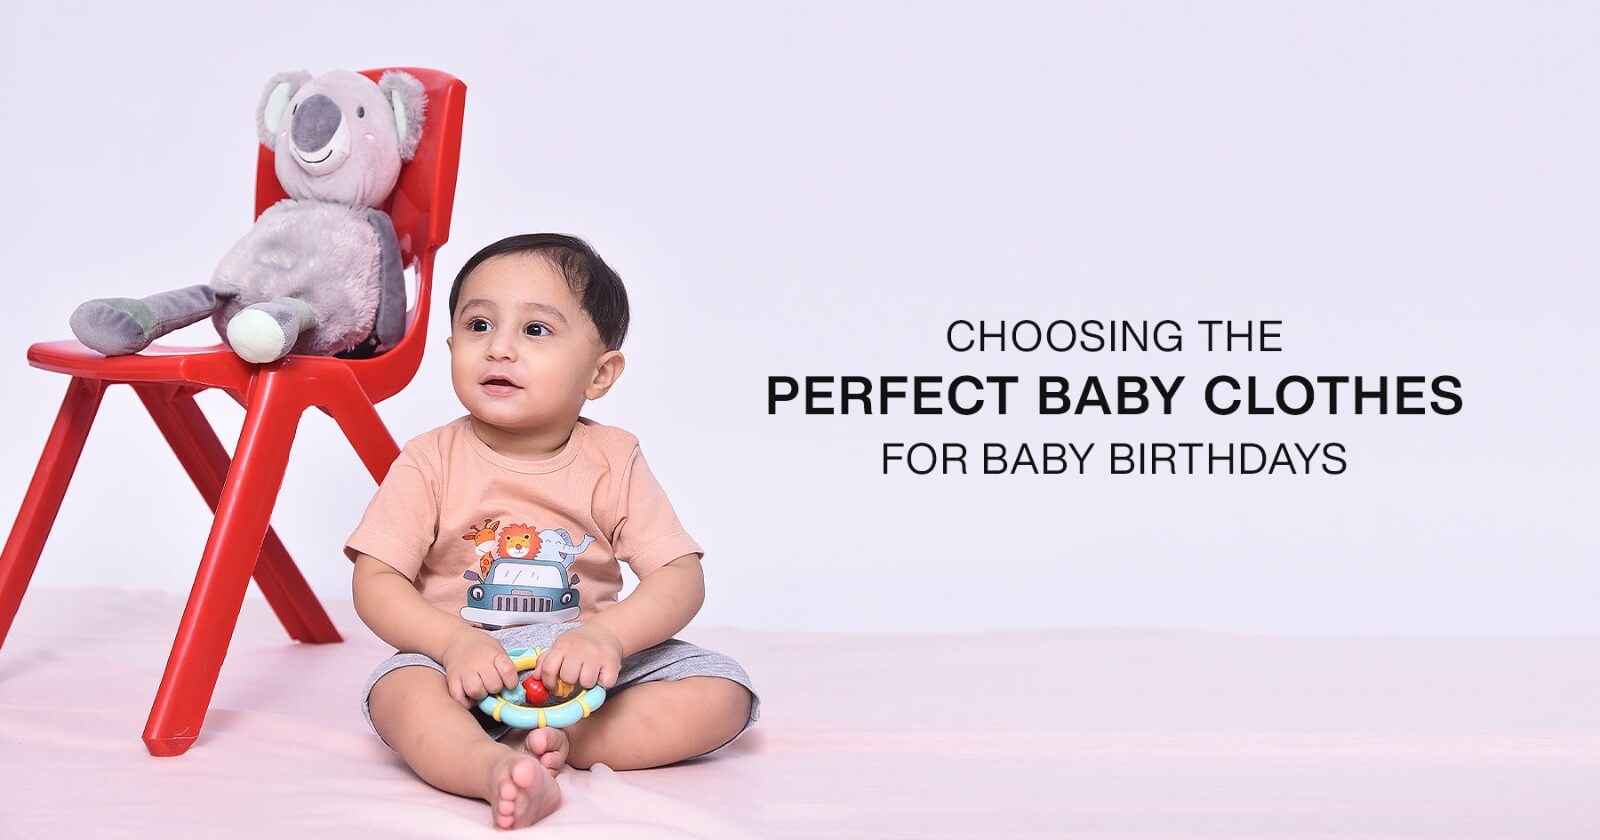 Choosing the Perfect Baby Clothes for Baby Birthdays